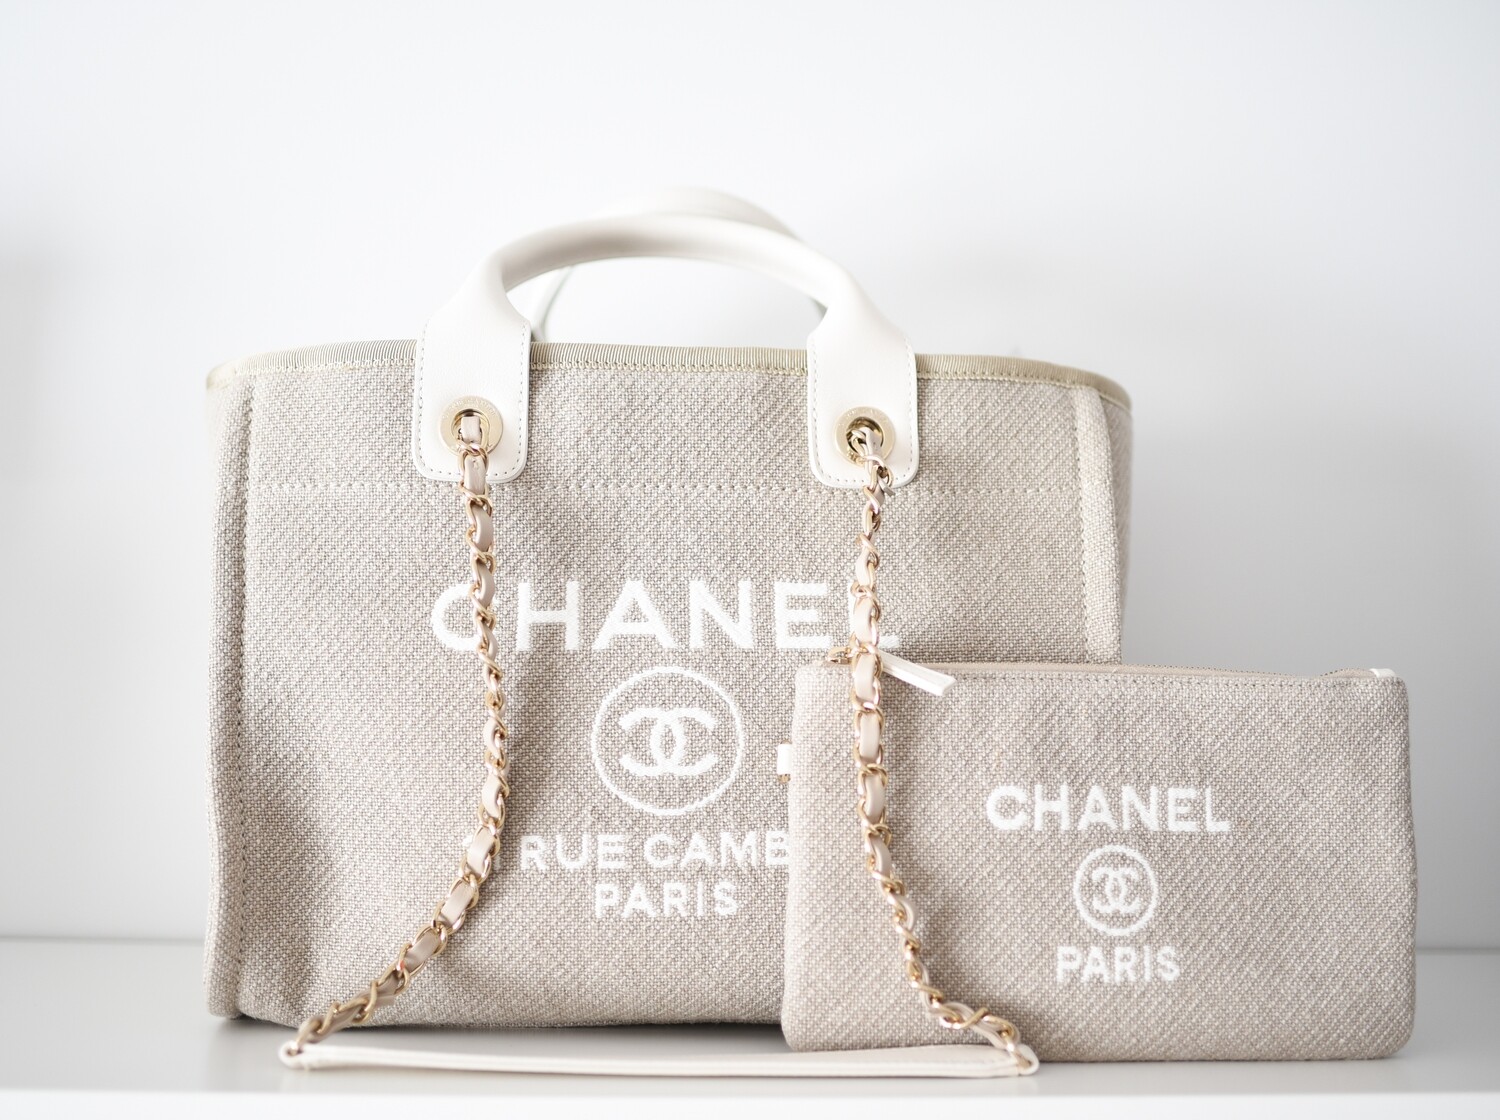 Chanel Deauville Small/Medium with Handles and Pouch, Beige with Light Gold  Hardware, New in Box GA001